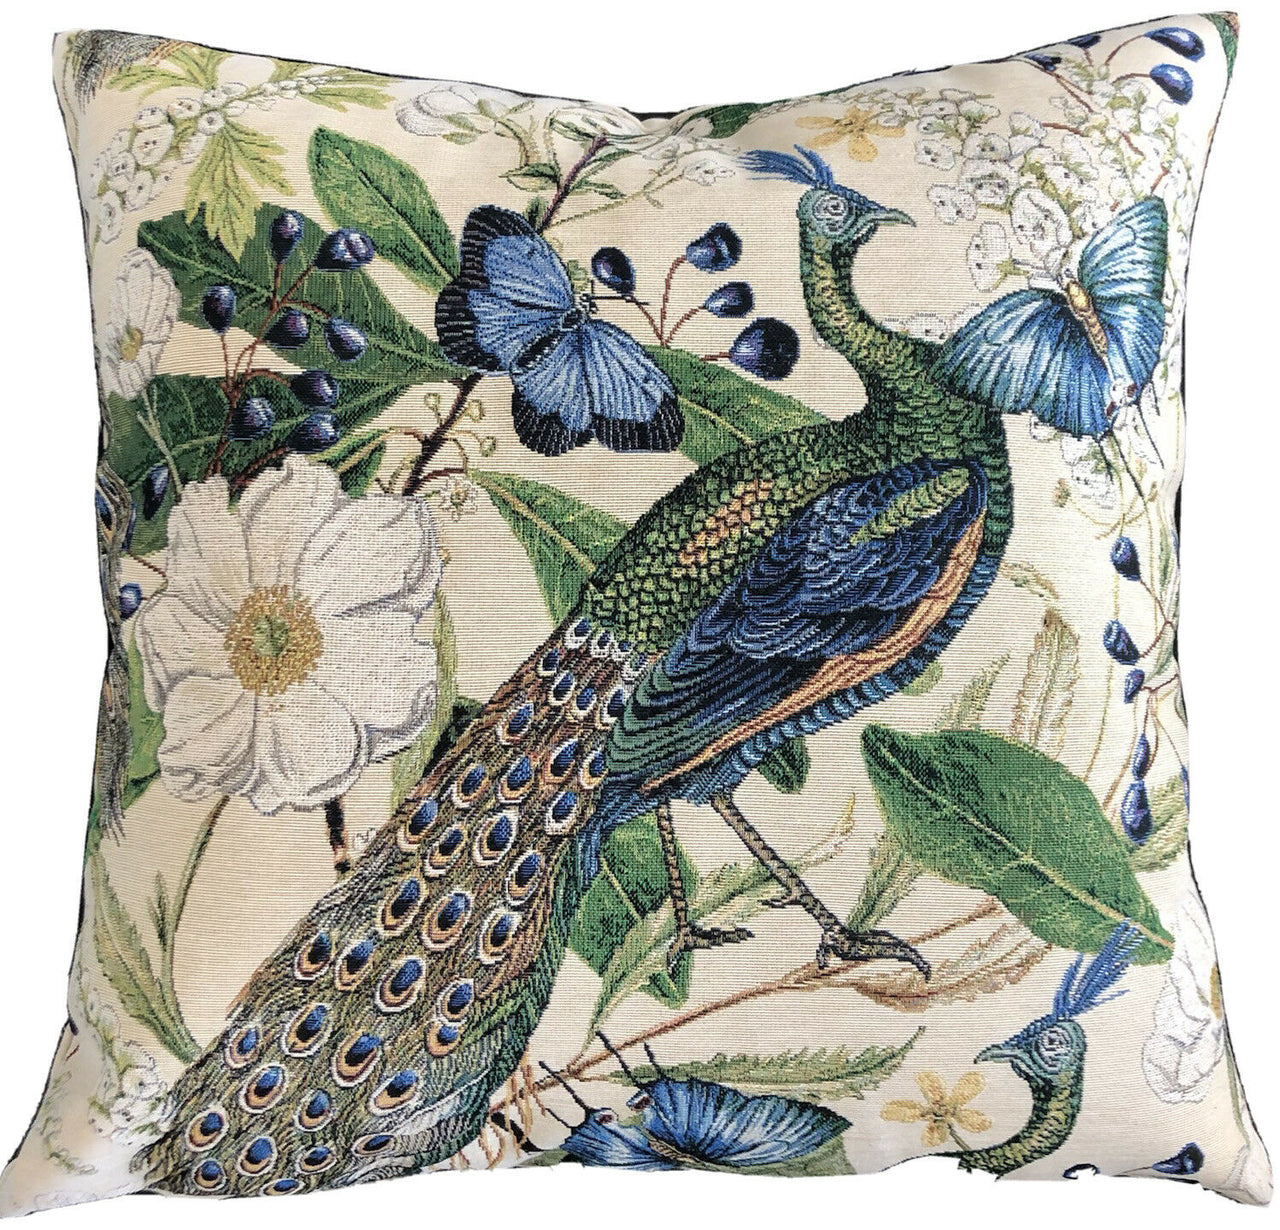 Beige Peacock Fabric Cushion Cover Green Blue Green Butterfly Floral 22"